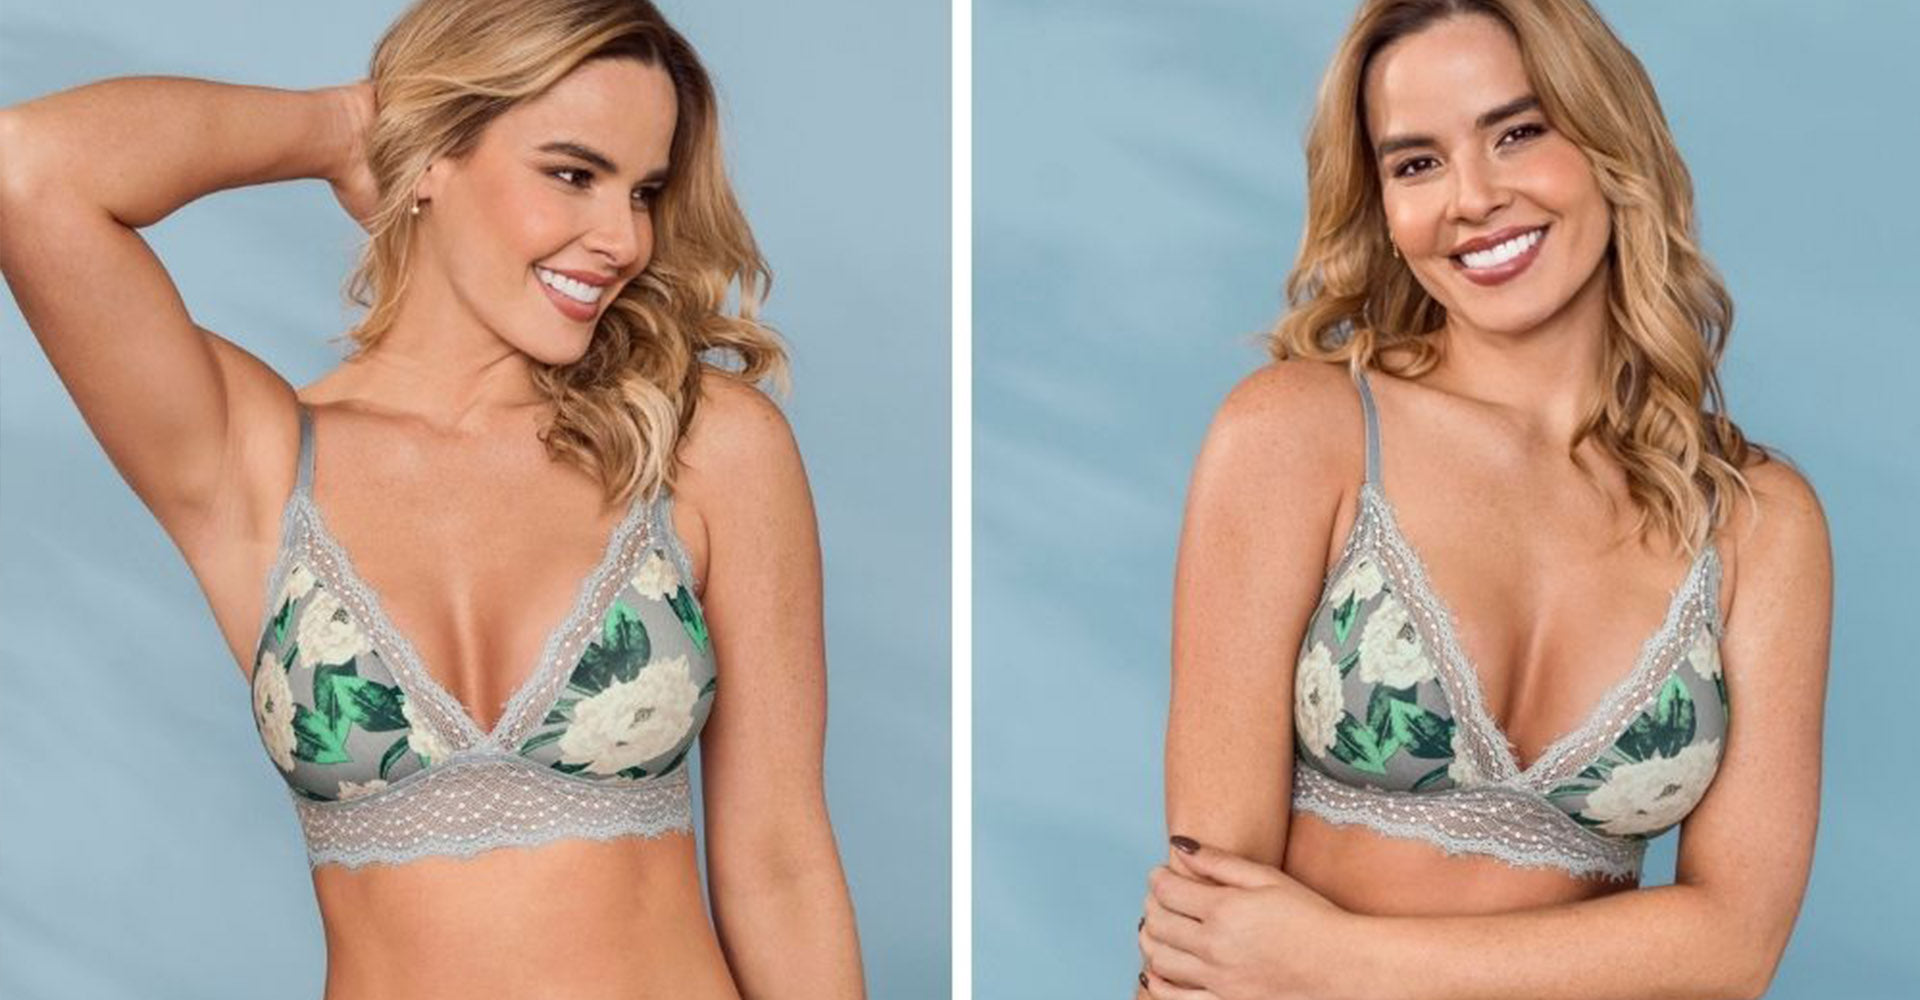 Bralette vs. Bra: What's the Difference?